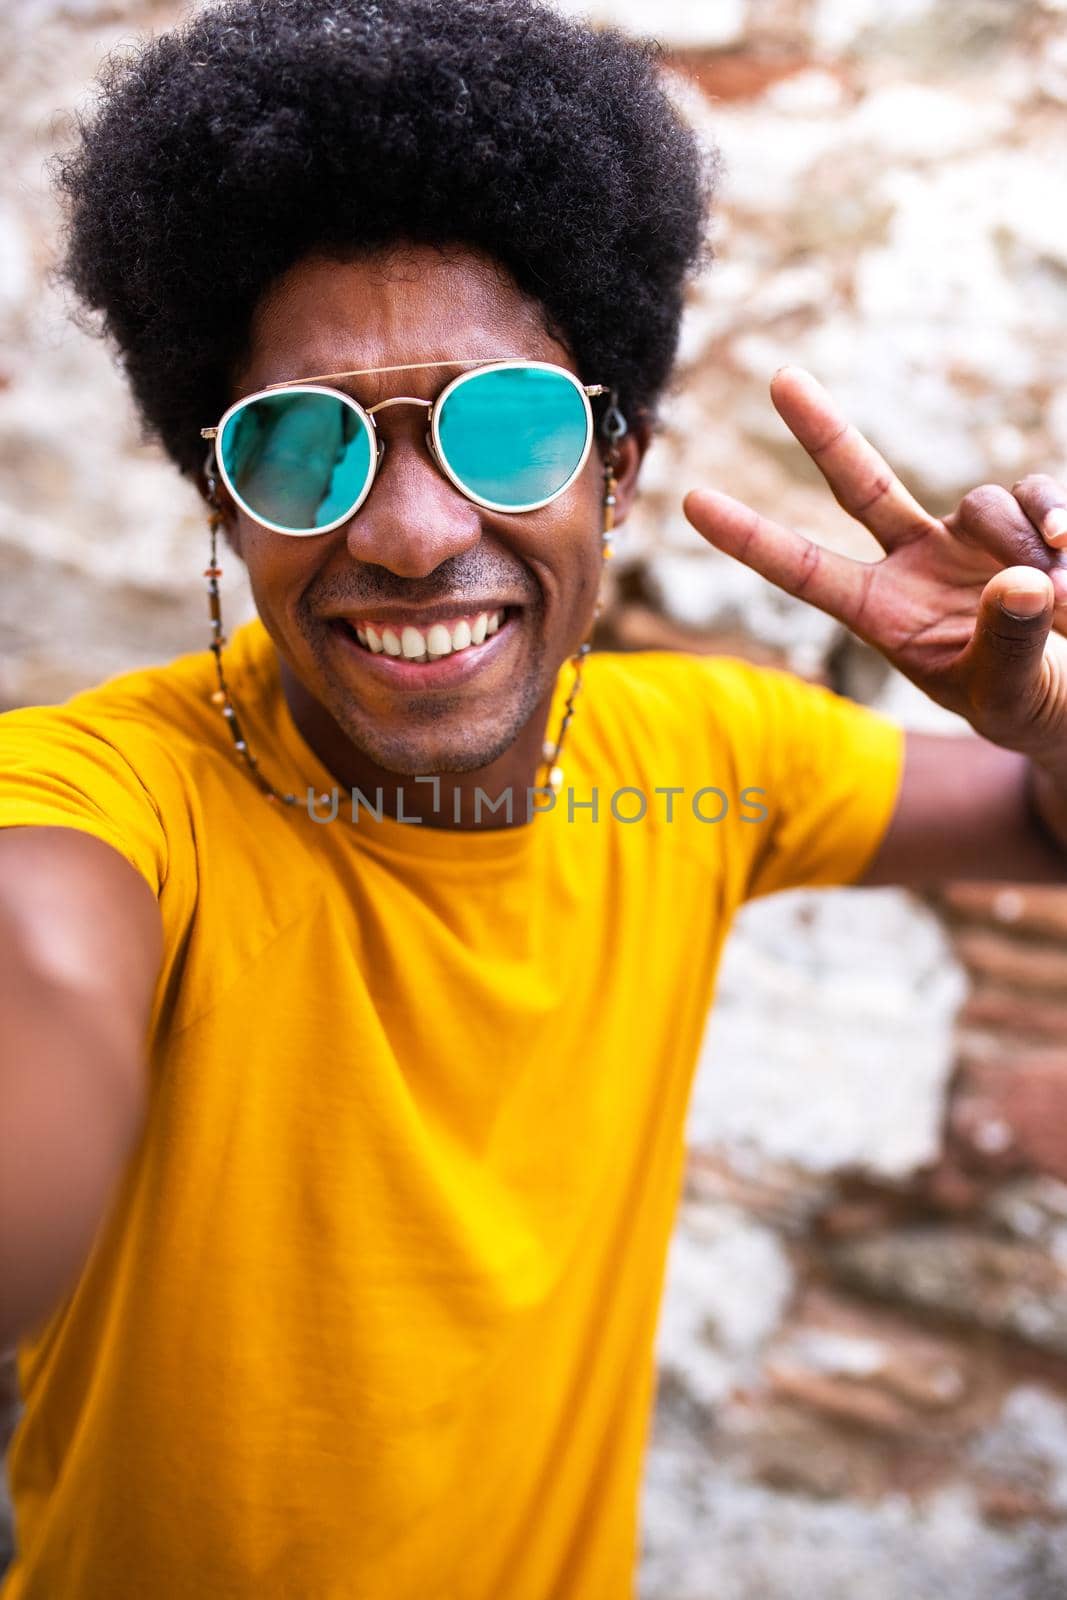 Happy, smiling young African American man taking selfie making peace sign. Copy space. Brick wall background. Vertical image. Lifestyle concept.